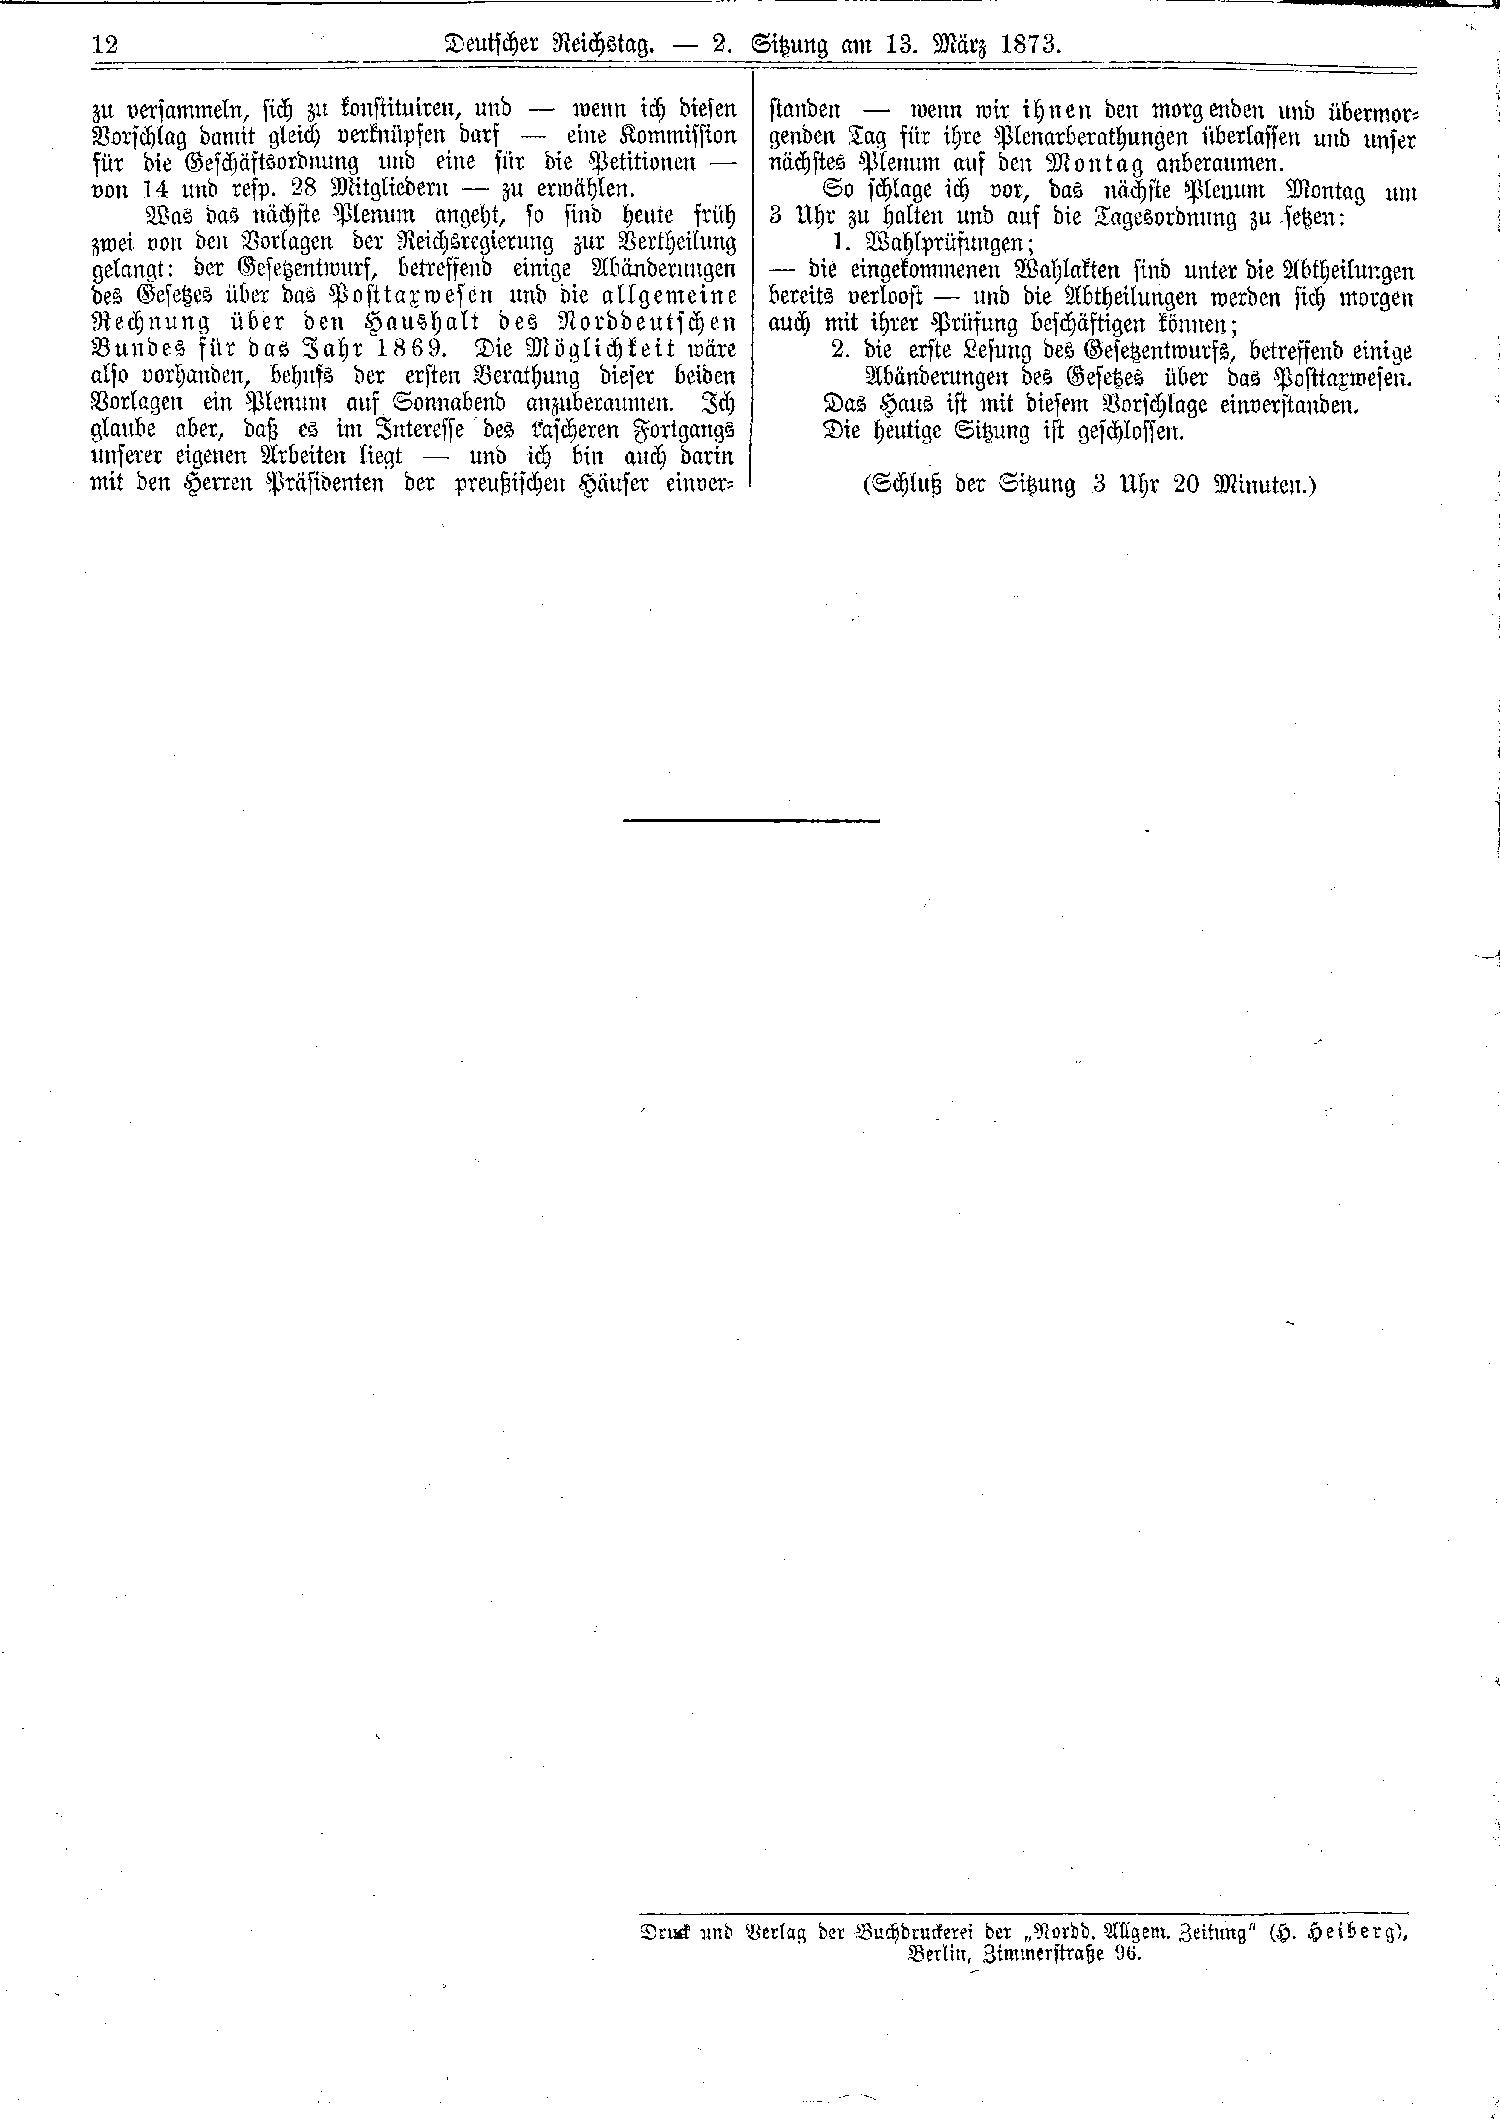 Scan of page 12